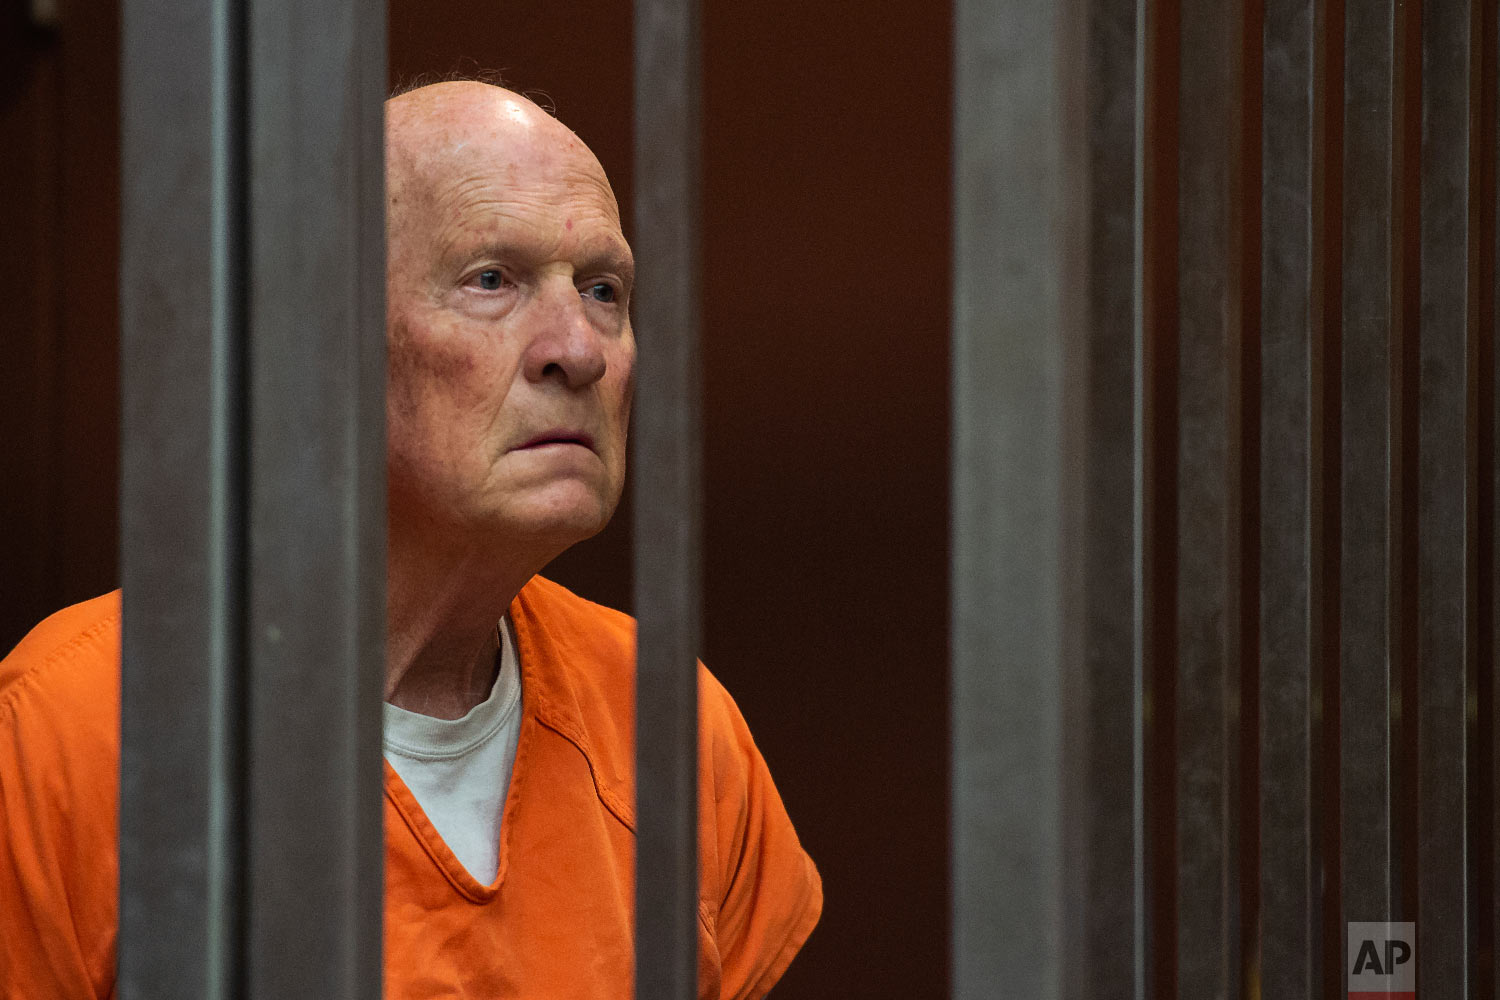  Former police officer Joseph James DeAngelo, accused of being the Golden State Killer, stands in a Sacramento, Calif., jail court on May 29, 2018, as a judge weighs how much information to release about his arrest. DeAngelo is suspected in at least 